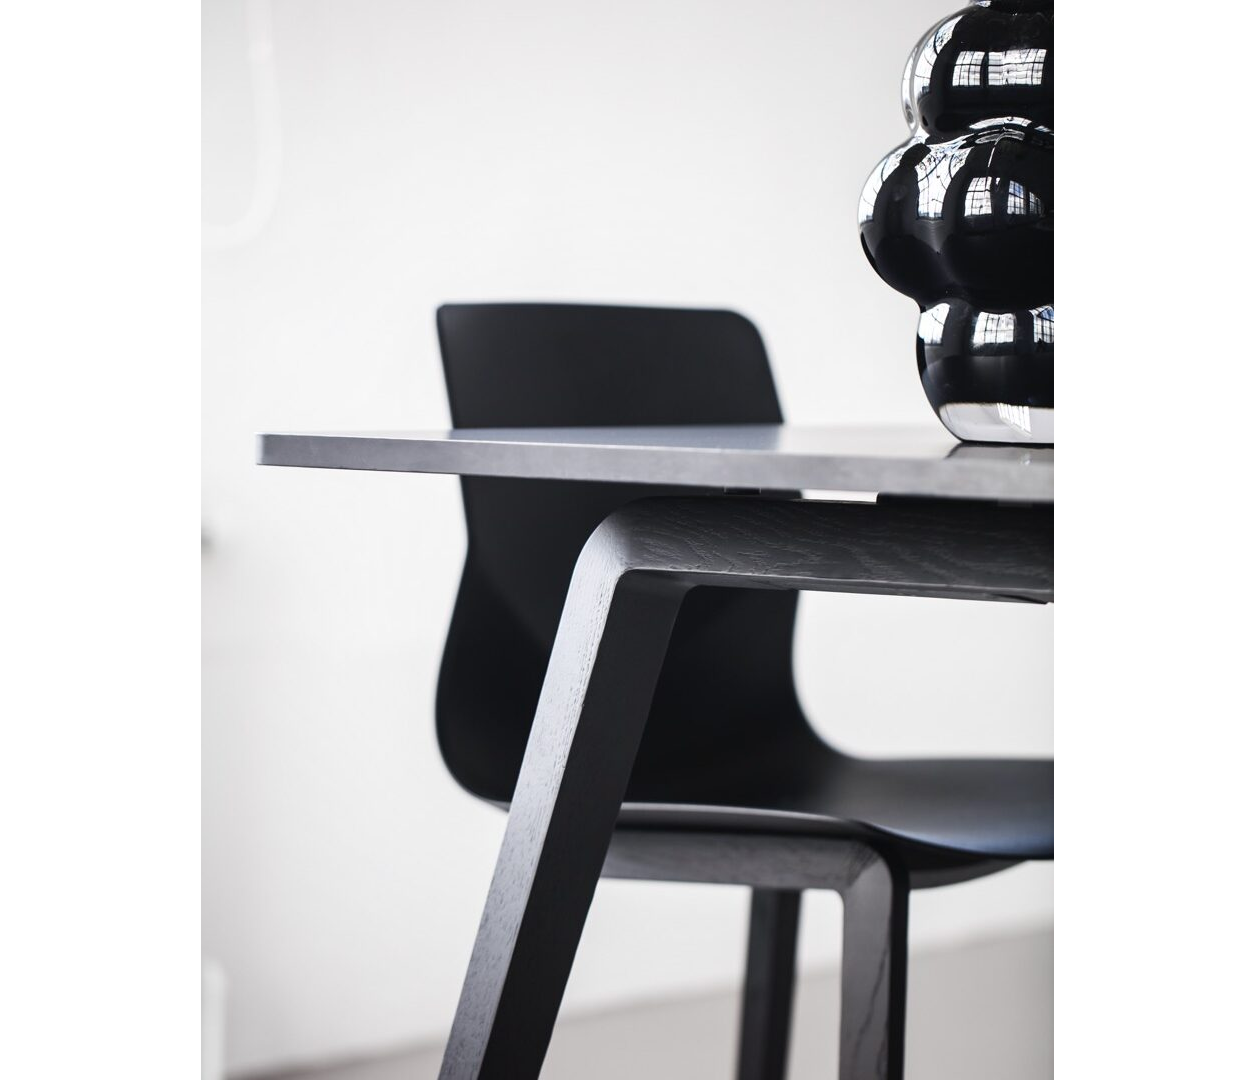 OCEE&FOUR – Chairs – FourSure 105 – Details Image 1 Large